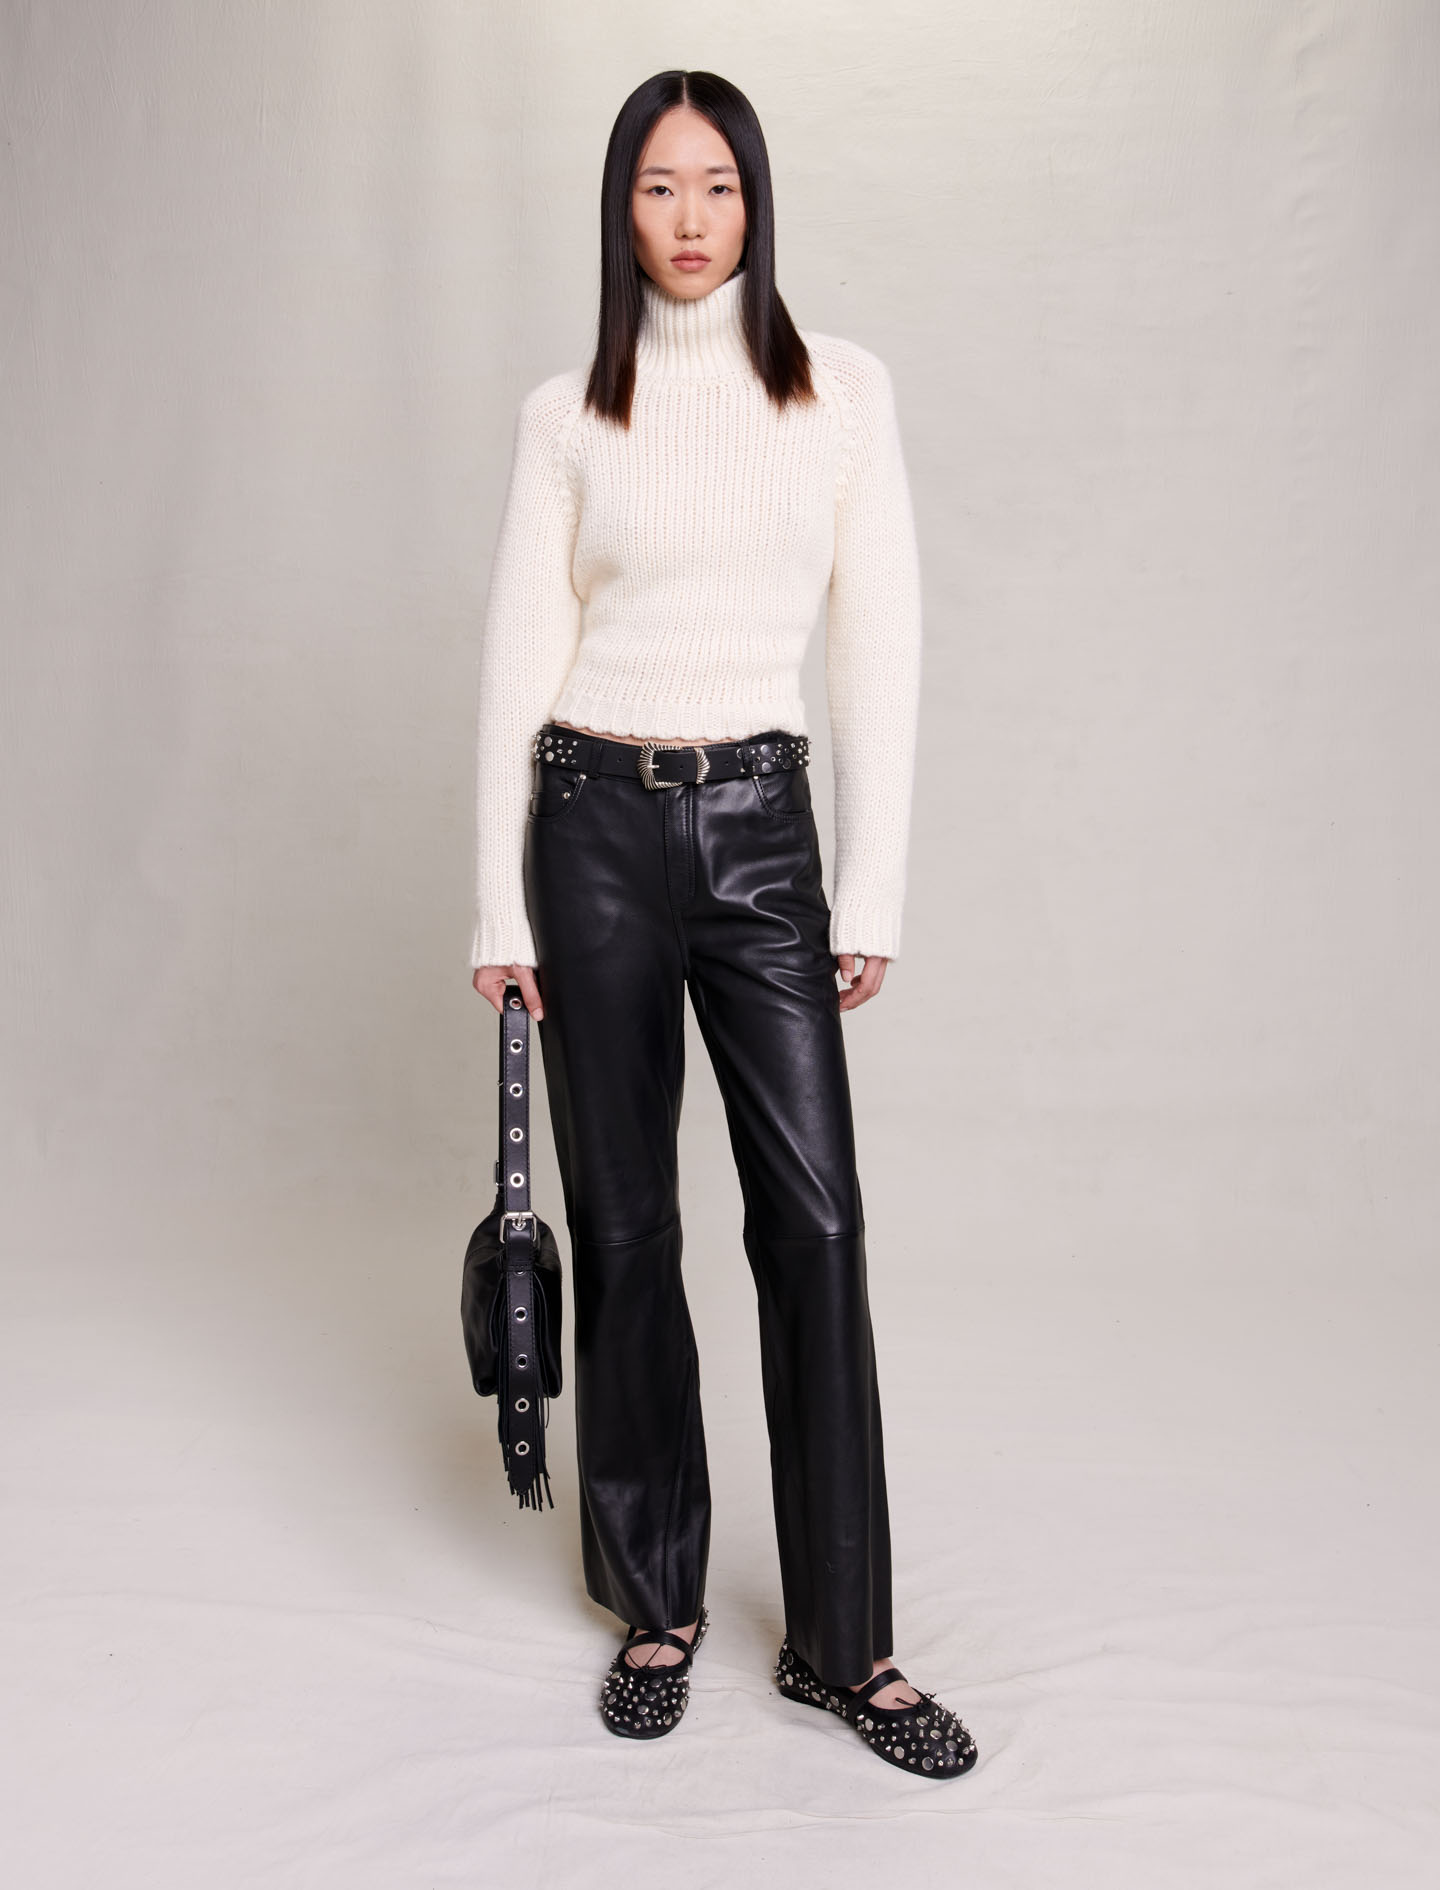 Maje Woman's cotton Leather trousers for Fall/Winter, in color Black / Black